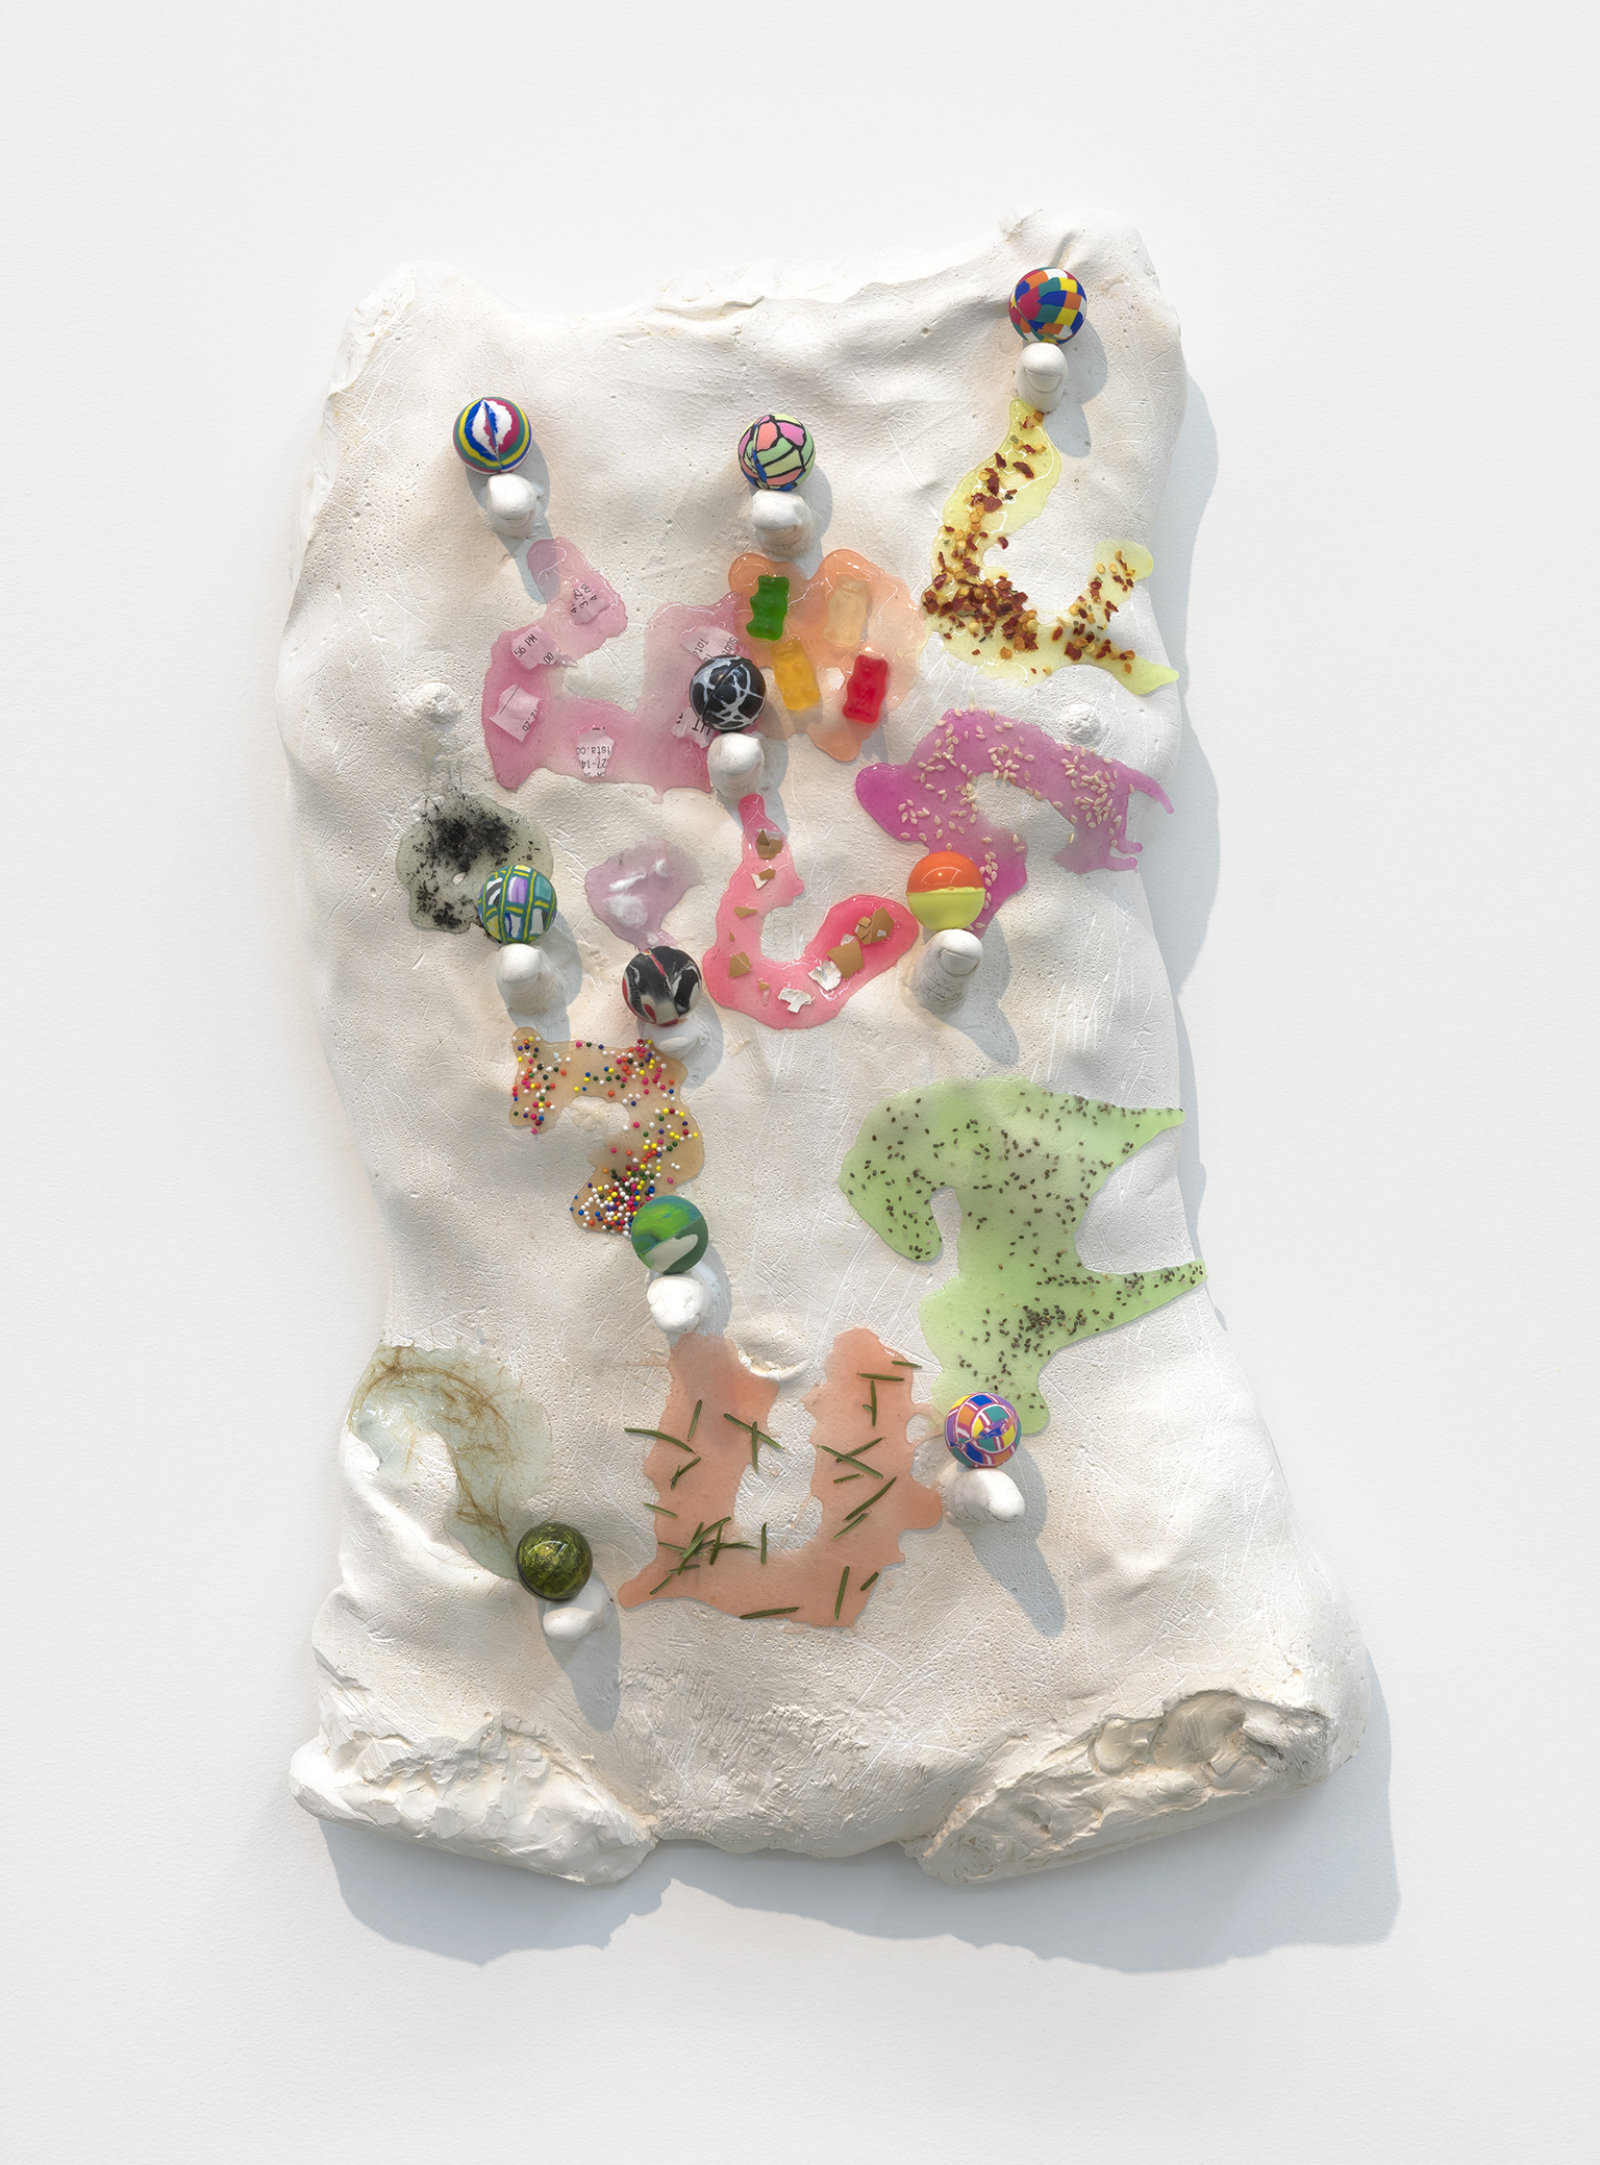 Kasper Feyrer, Sick Muses (thumbs), 2015, plaster, silicon, mixed media, 21 x 14 x 4 in. (53 x 36 x 10 cm)